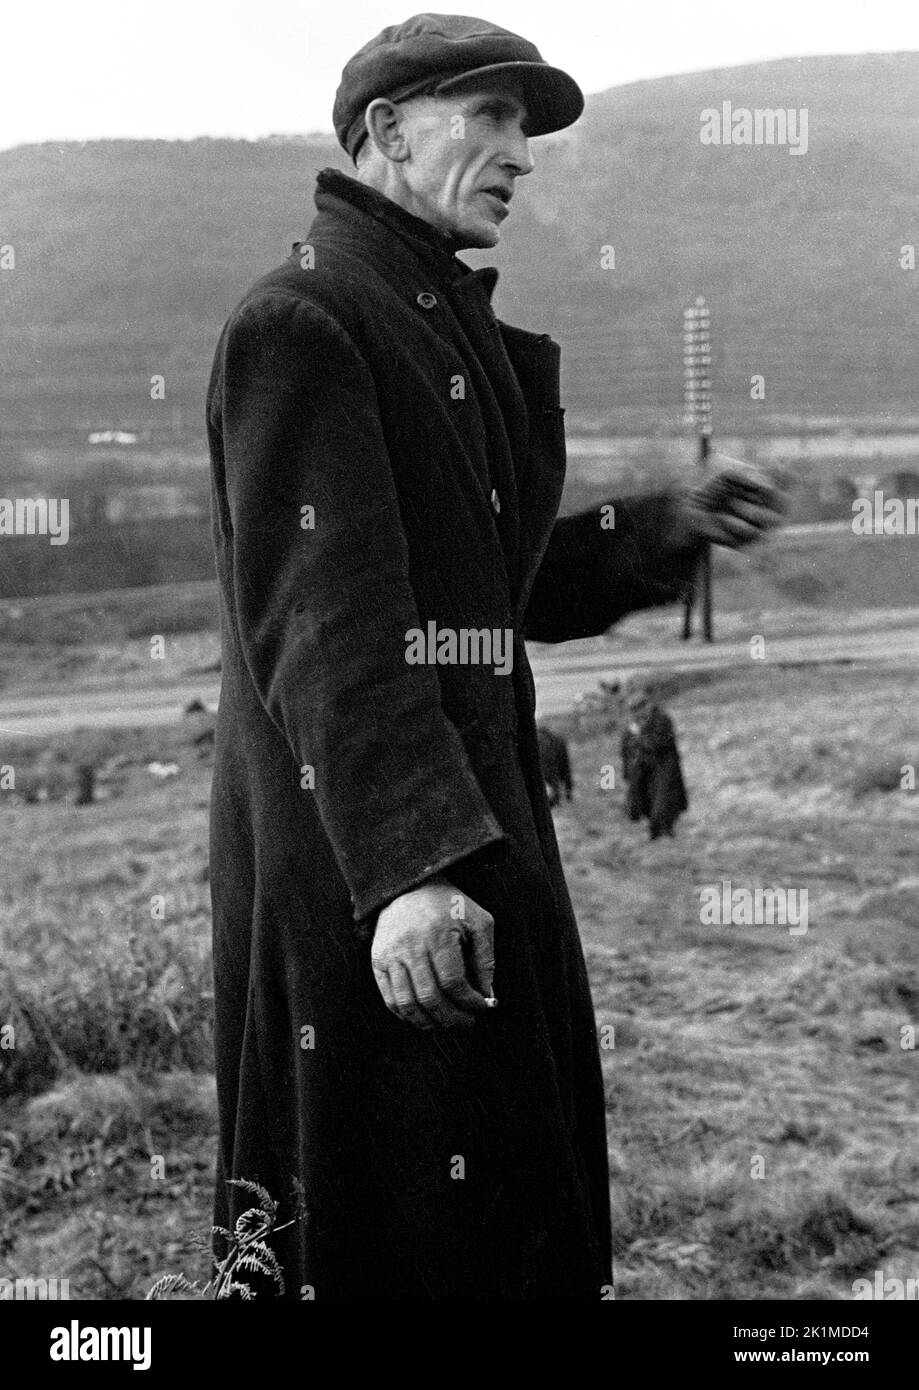 1930s, historical, a former Welsh mine worker in a flat cap and wearing a ragged patched coat standing on rough ground at a slag heap, Merthyr, South Wales, UK. Stock Photo